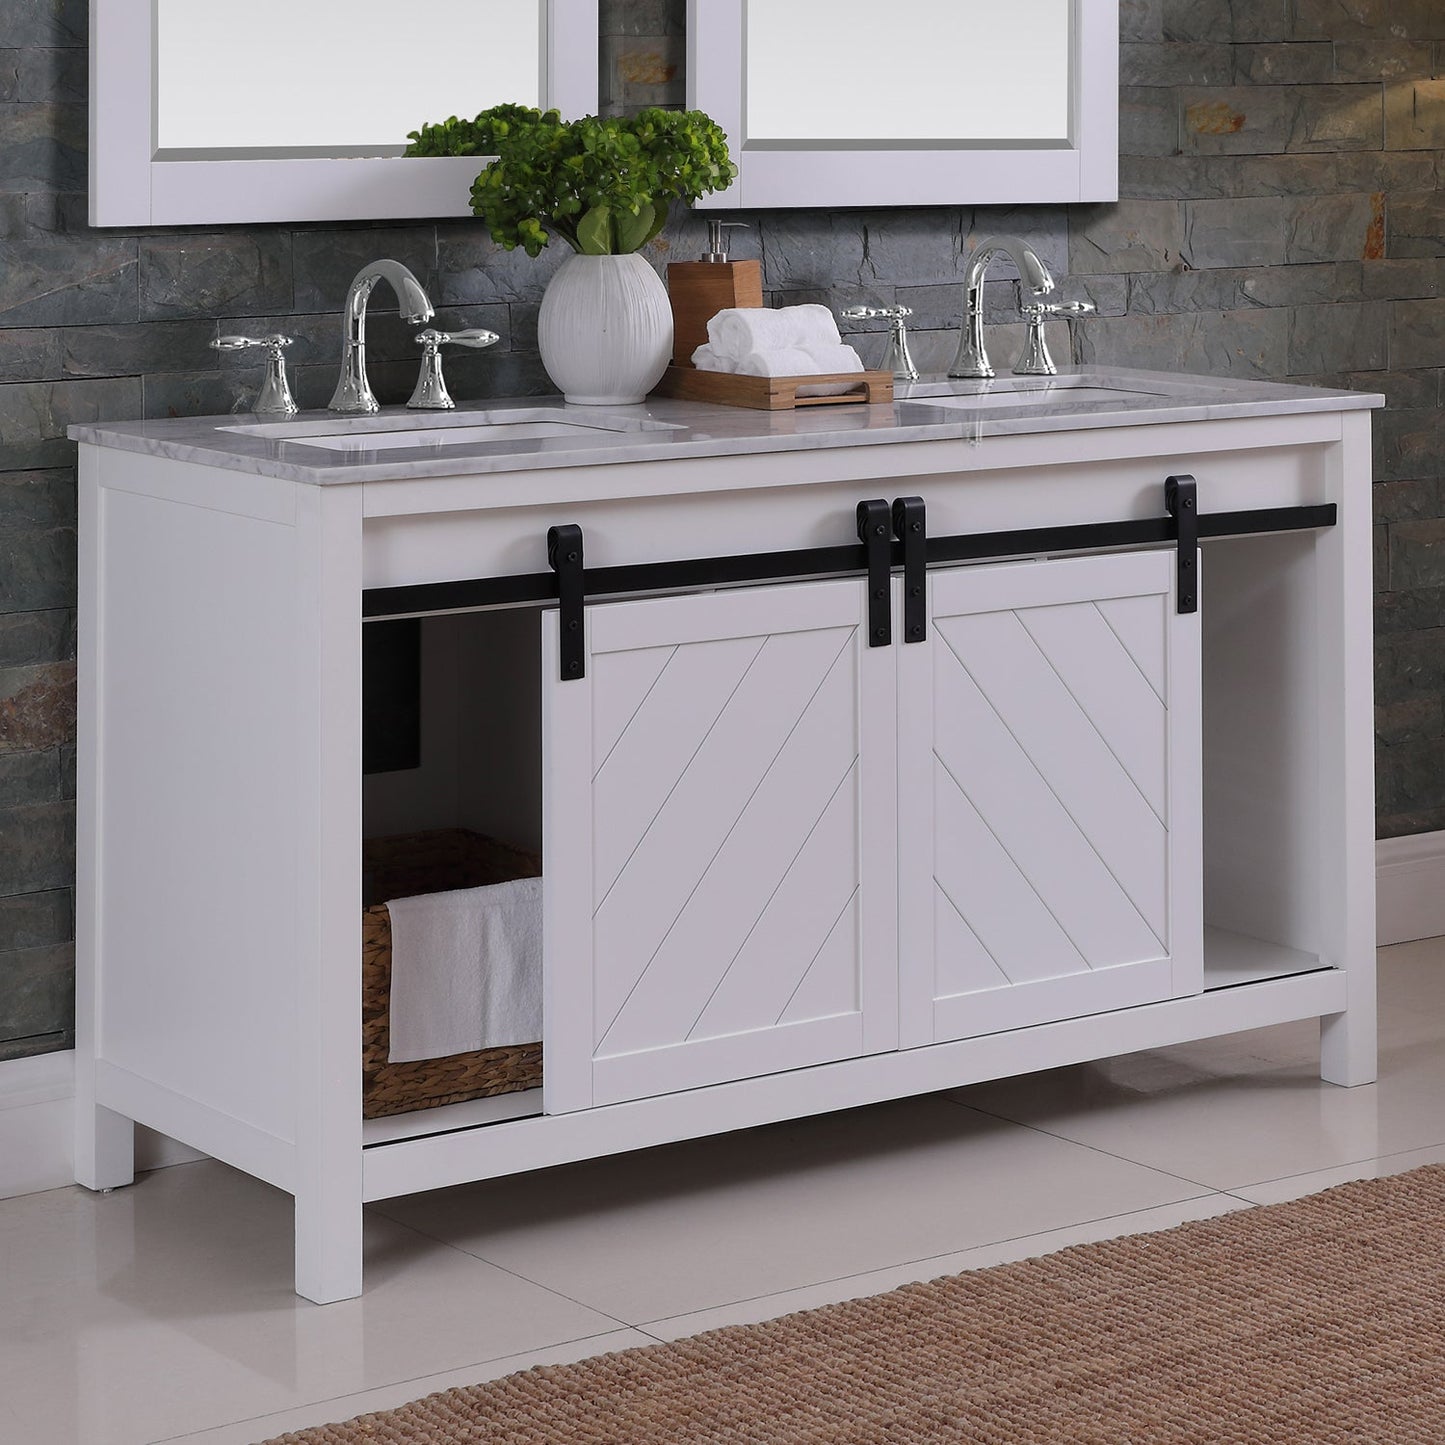 Kinsley 60" Double Bathroom Vanity Set in White and Carrara White Marble Countertop with Mirror